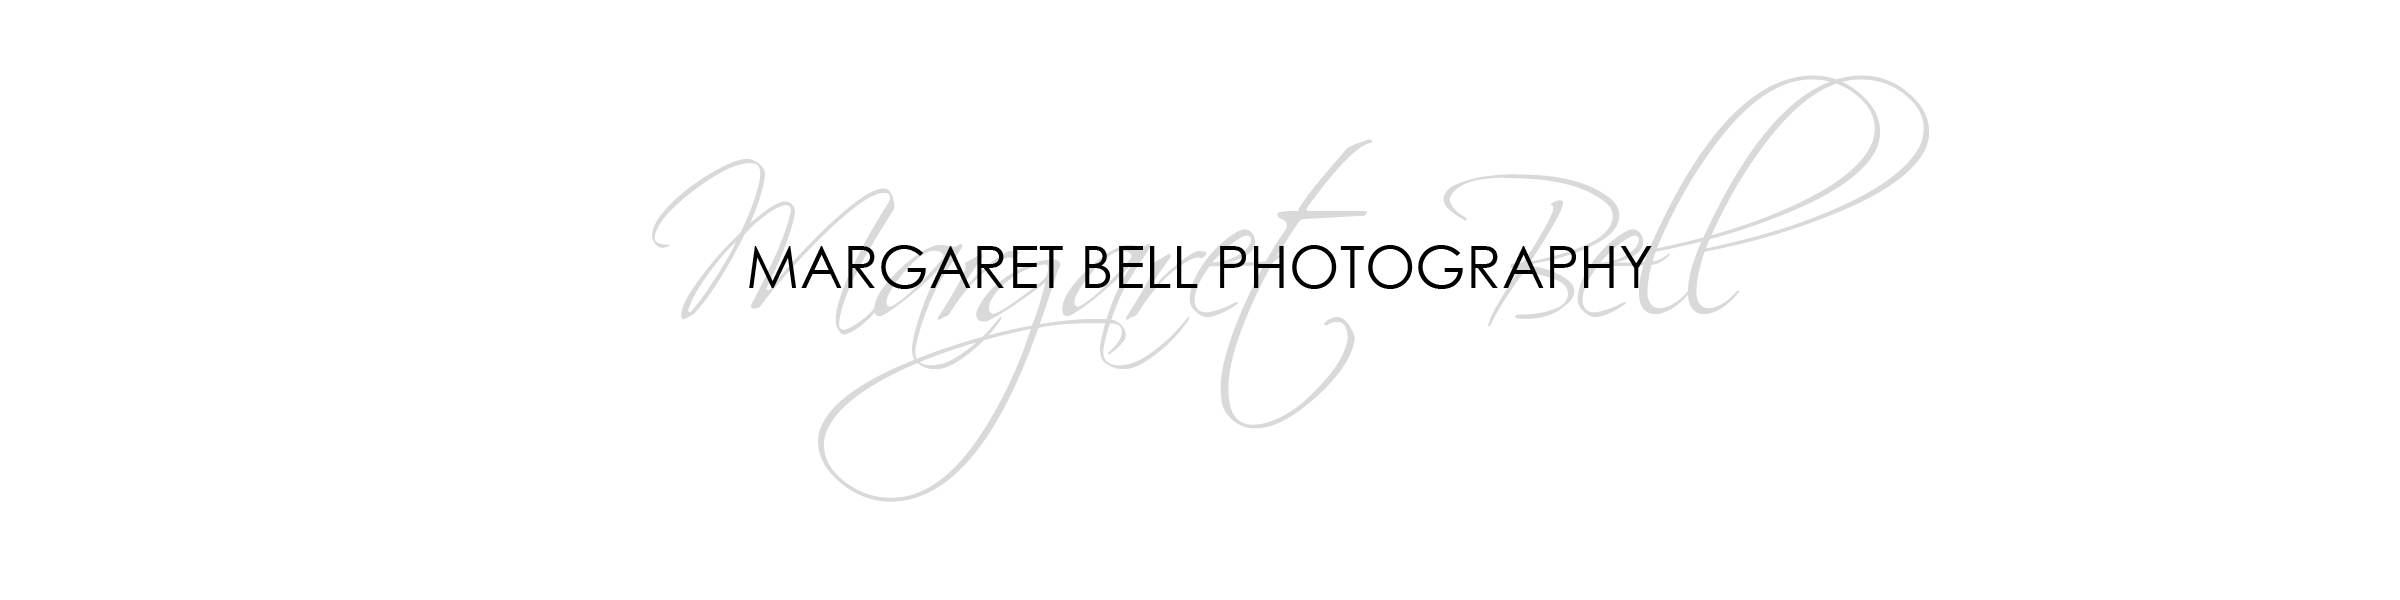 Margaret Bell Photography